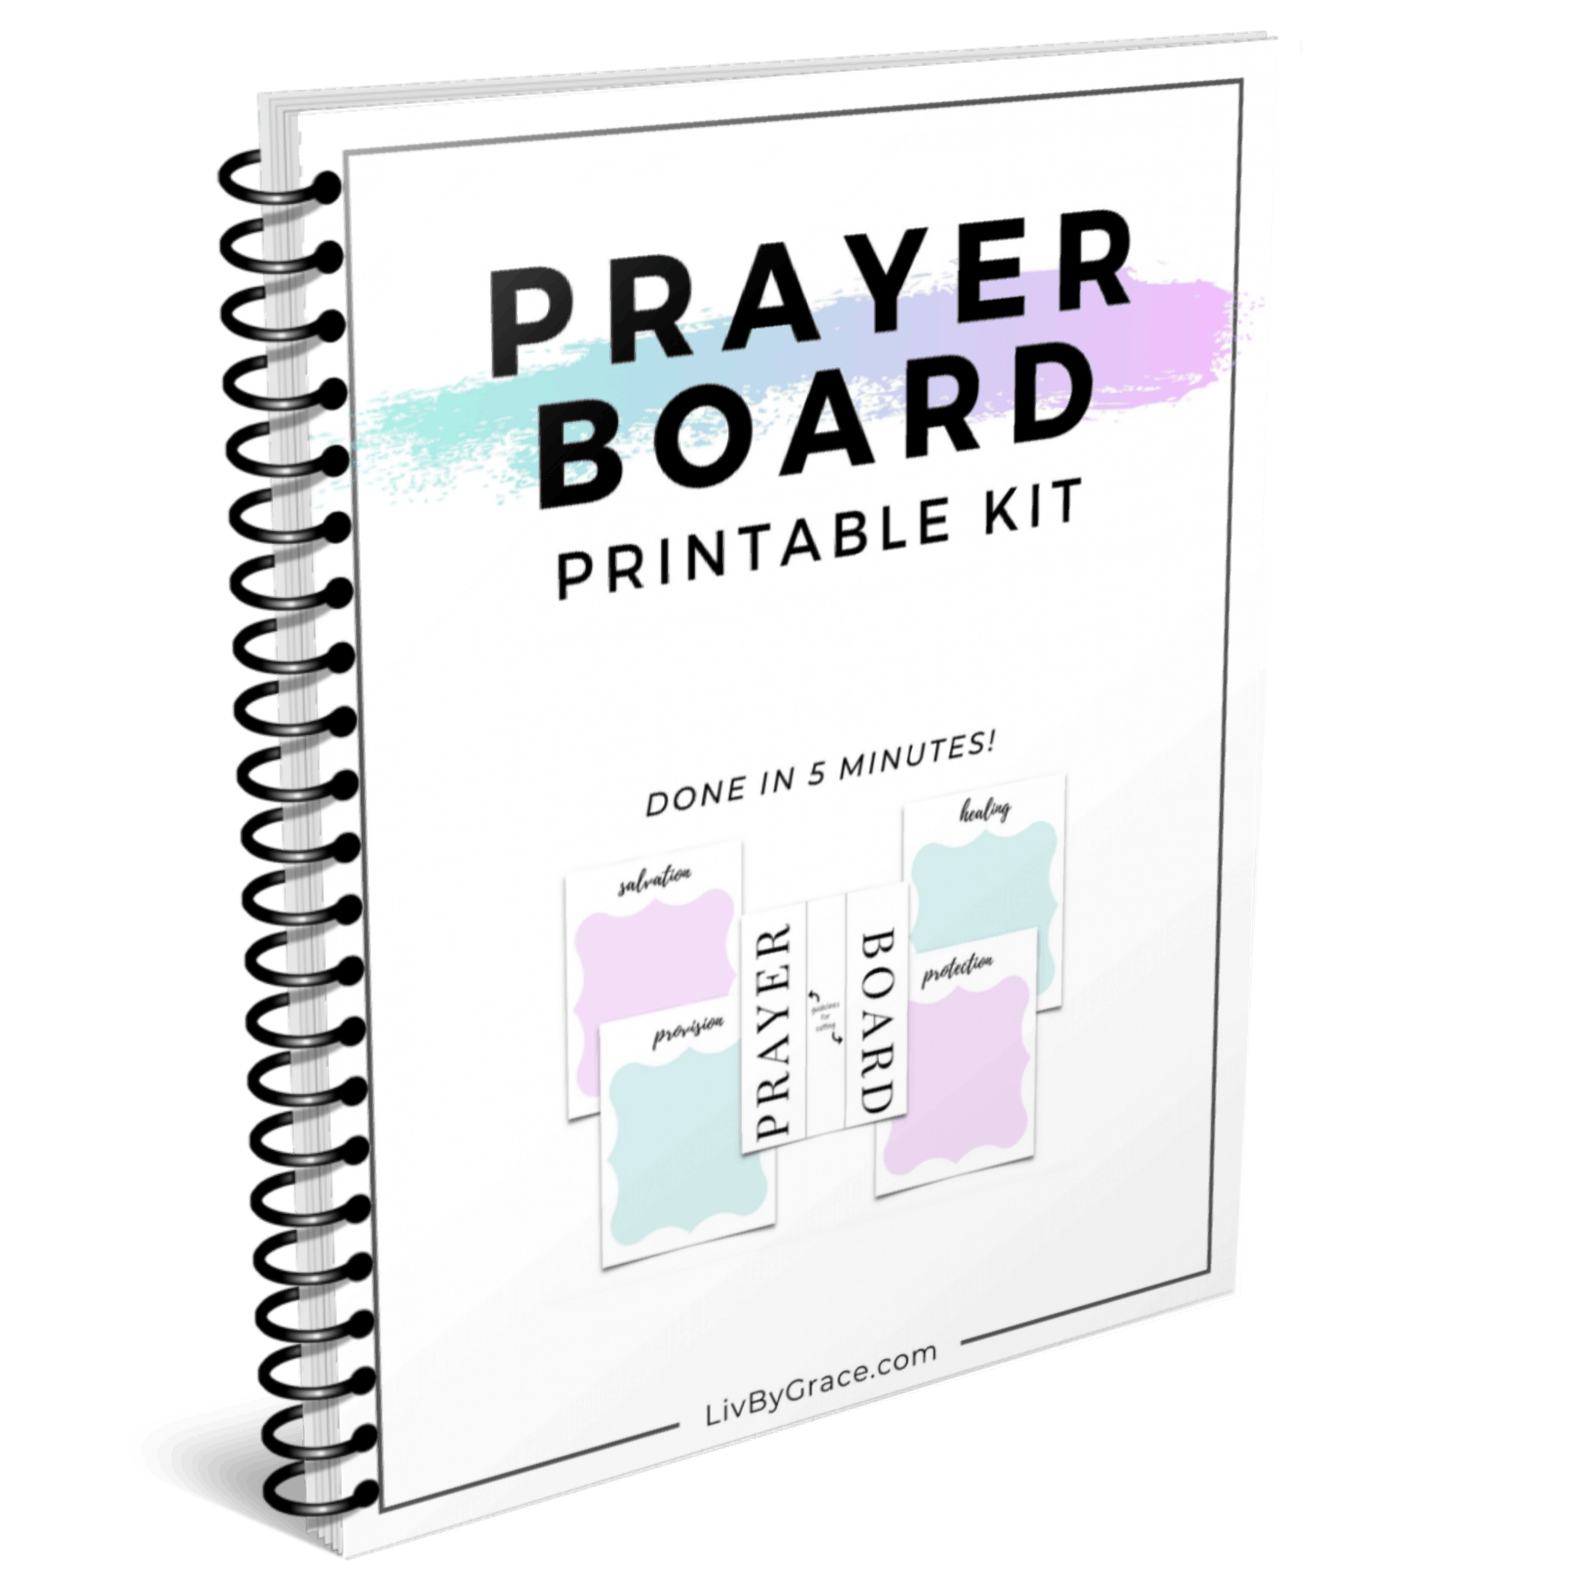 DIY Quick and Easy Prayer Board (FREE printable!) - Liv By Grace